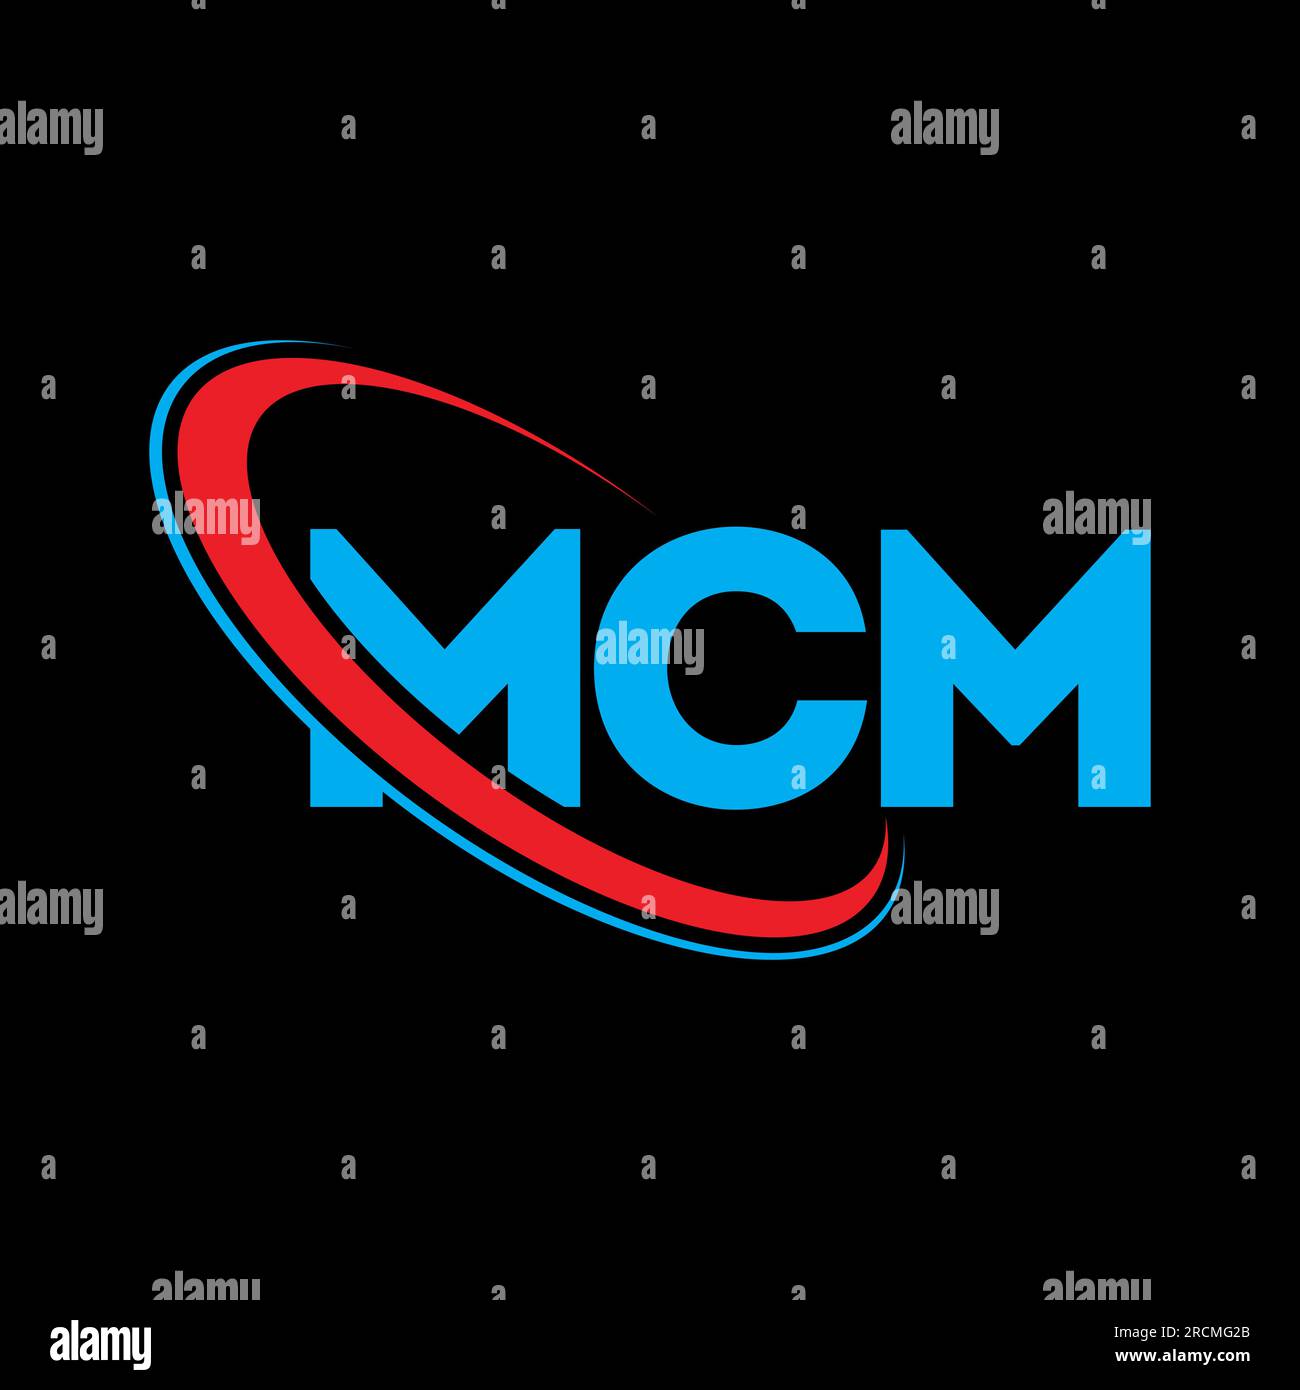 Hexagon logo with the letters mcm design Vector Image